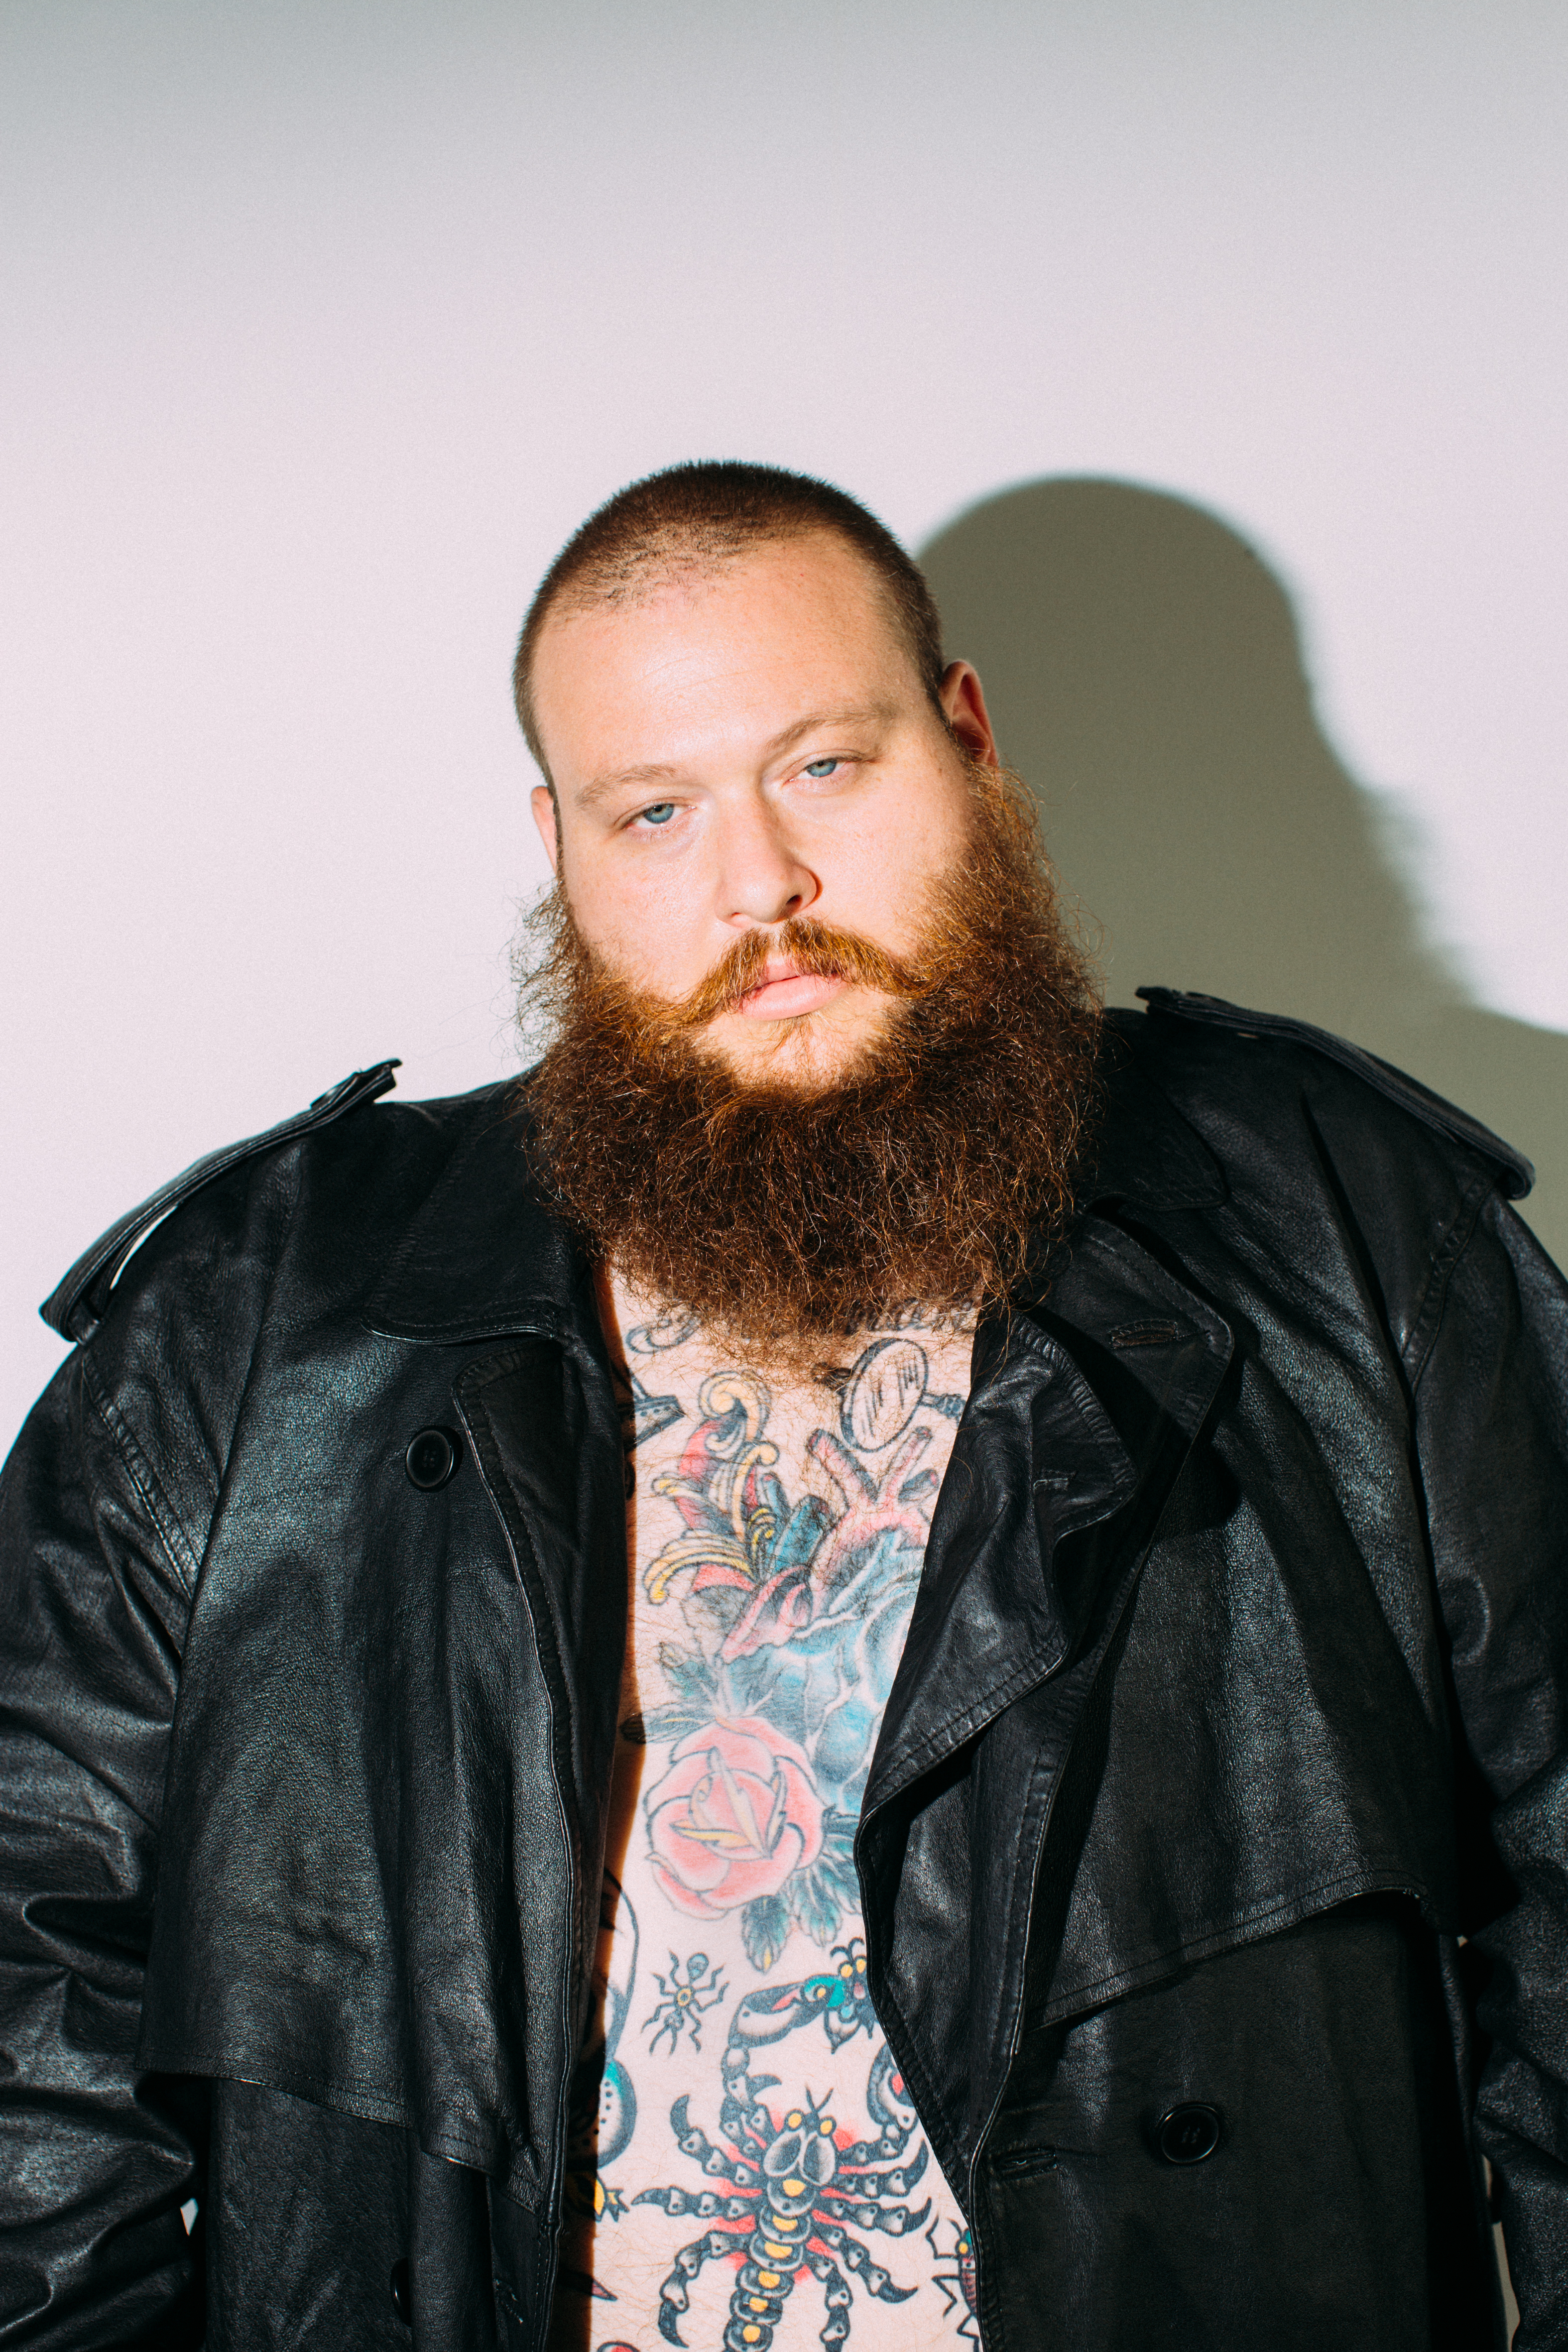 How Action Bronson Conquered Media By Being His Most Authentic